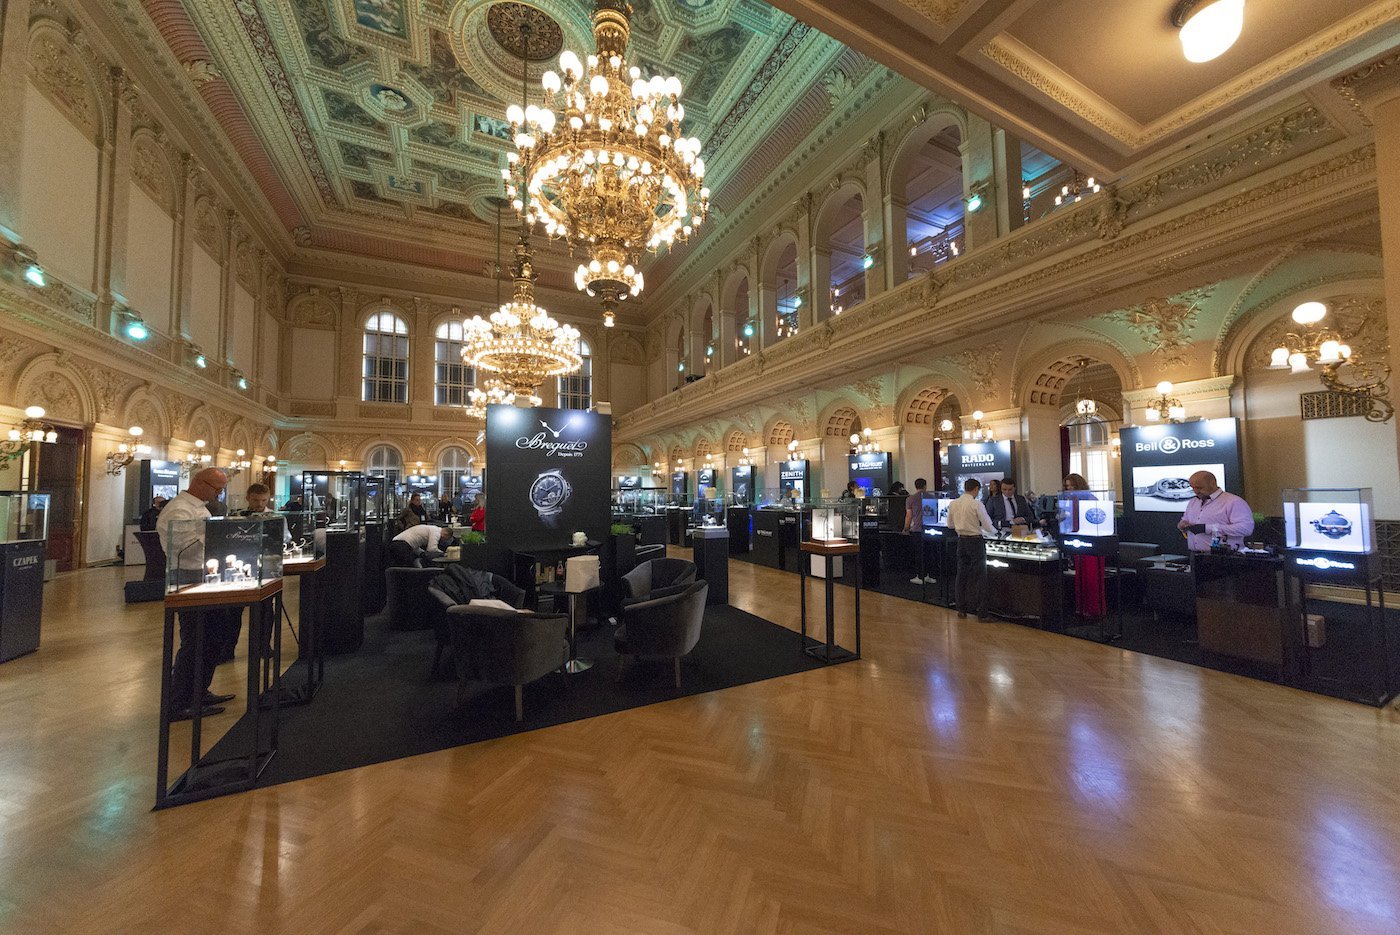 Presenting the 8th Salon Exceptional Watches in Prague